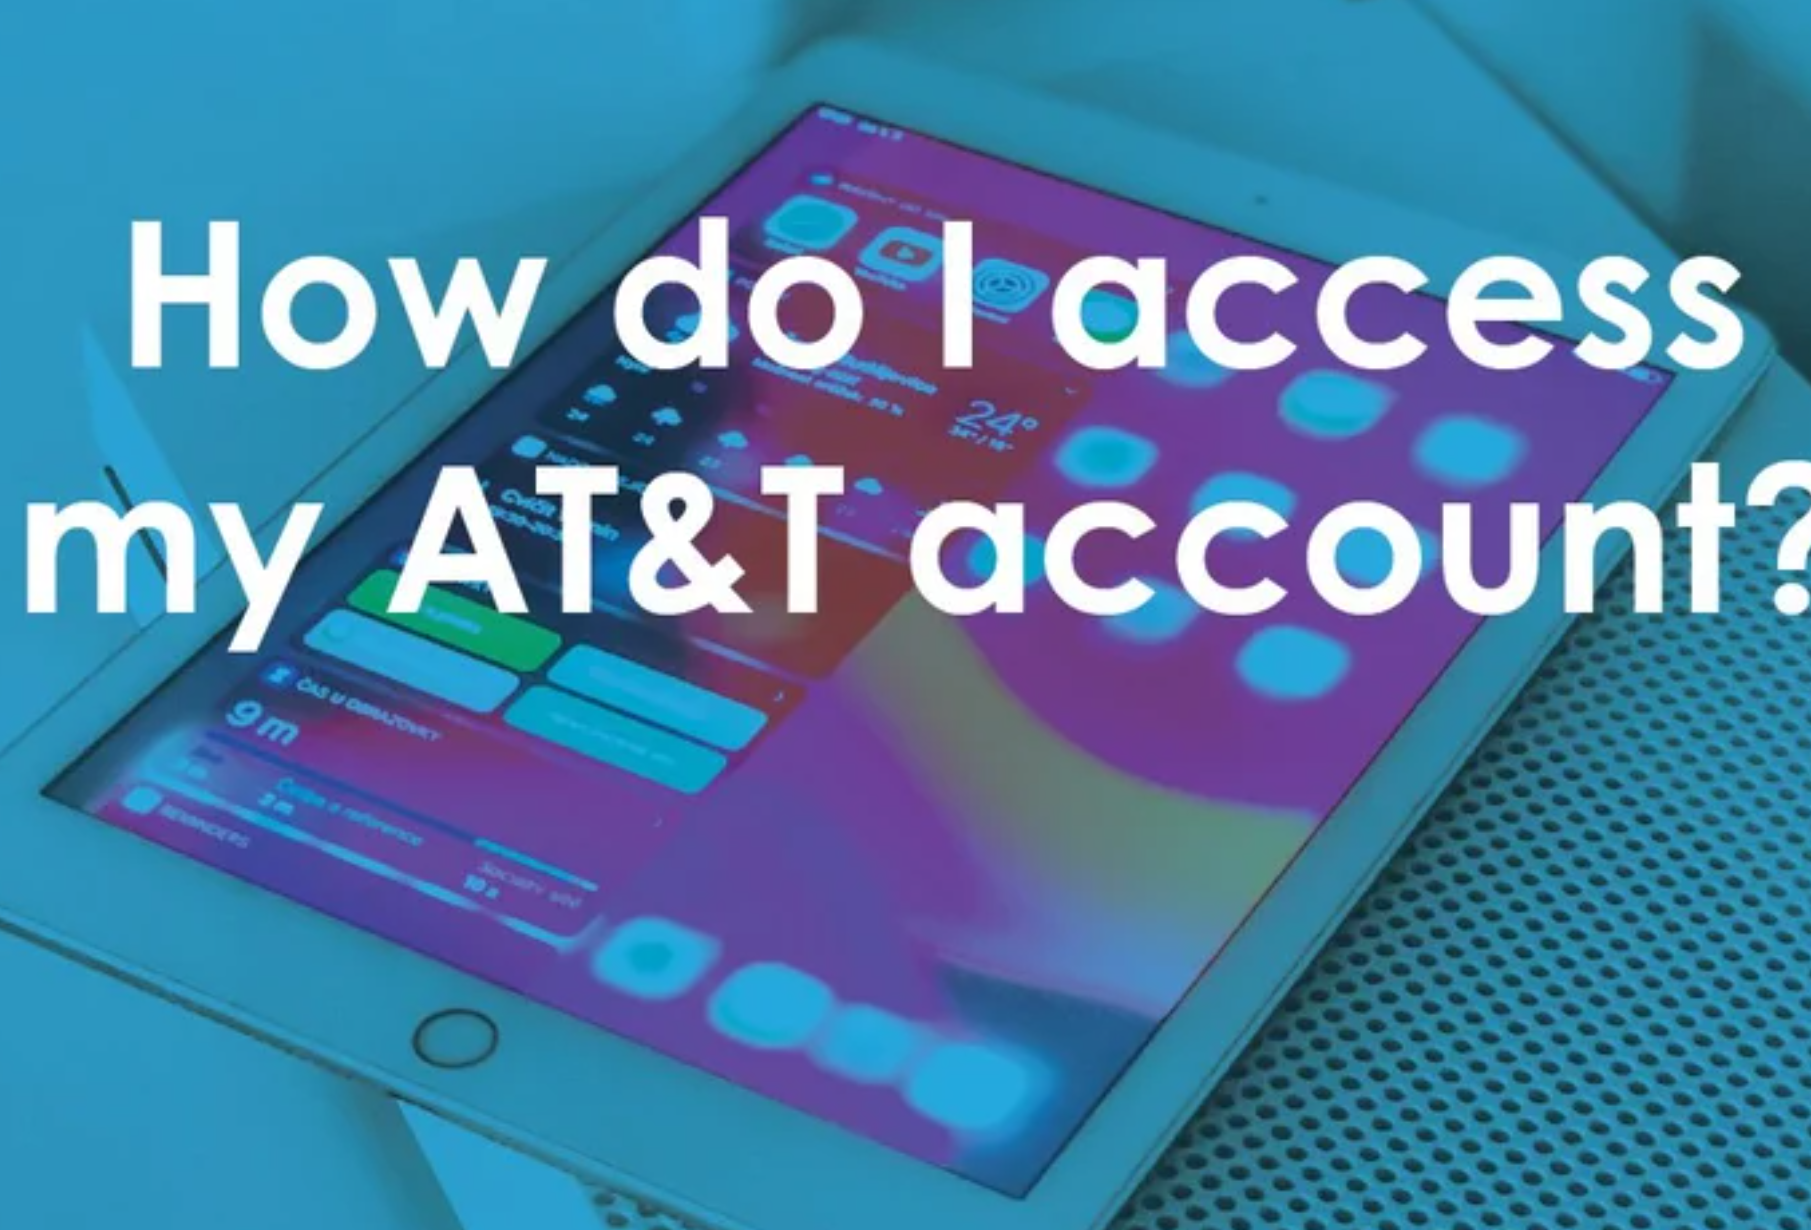 MYAT&T LOGIN TO MANAGE YOUR ACCOUNT